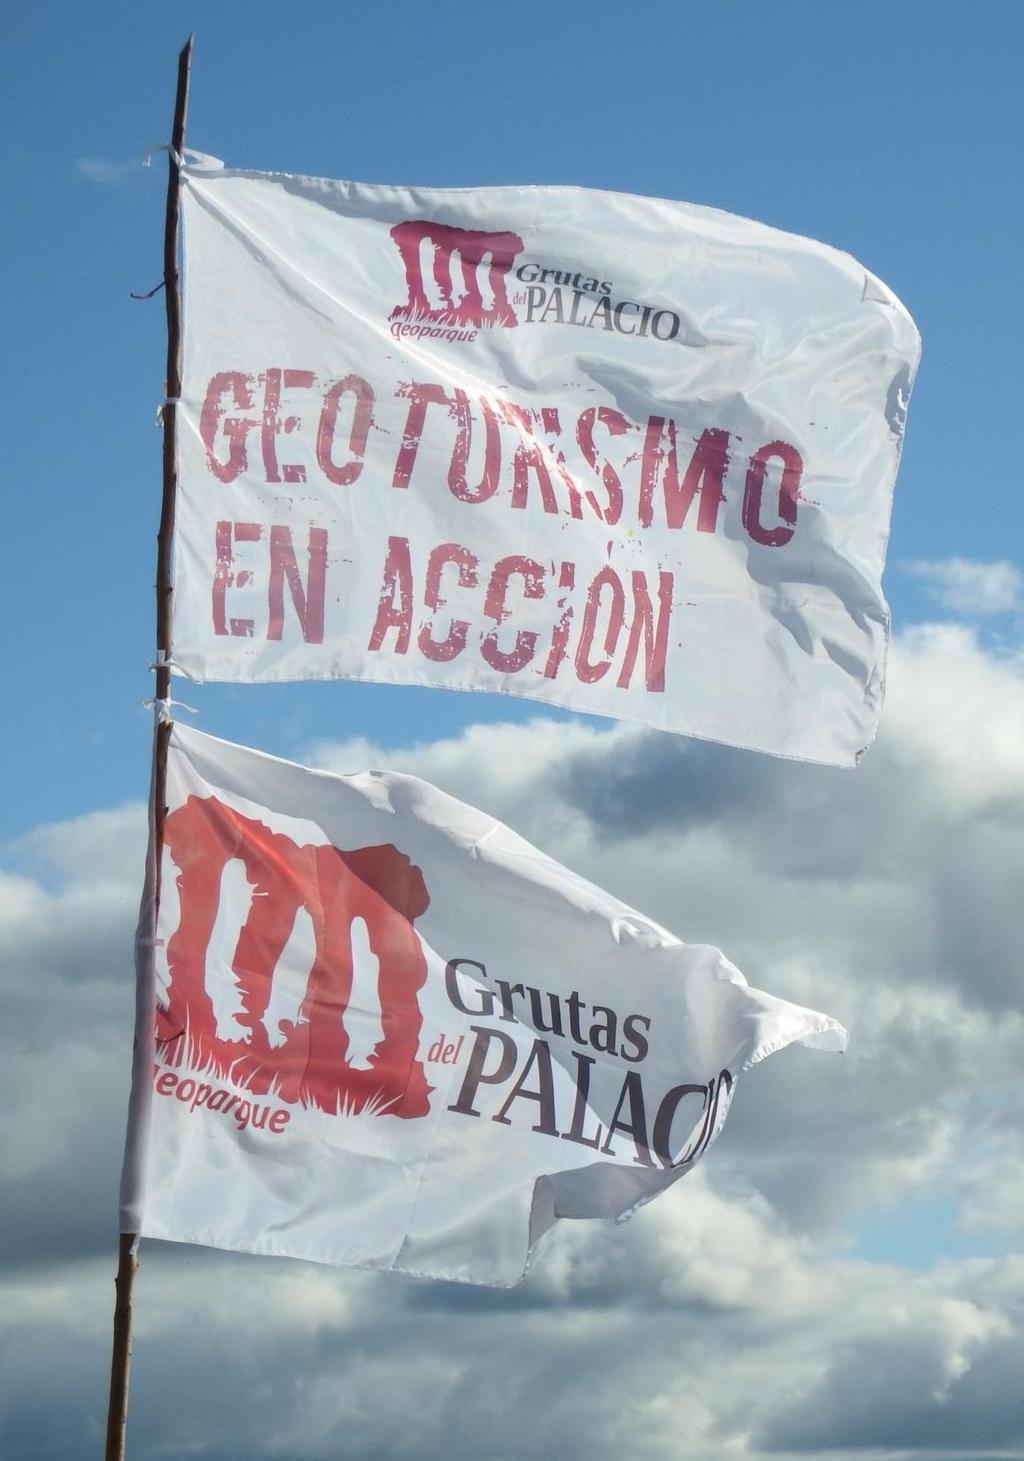 Proposal of action By virtue of the above and as an UNESCO Global Geopark, Grutas del Palacio proposes the Latin American Geotourism Day, to be held simultaneously at all geoparks and/or aspiring